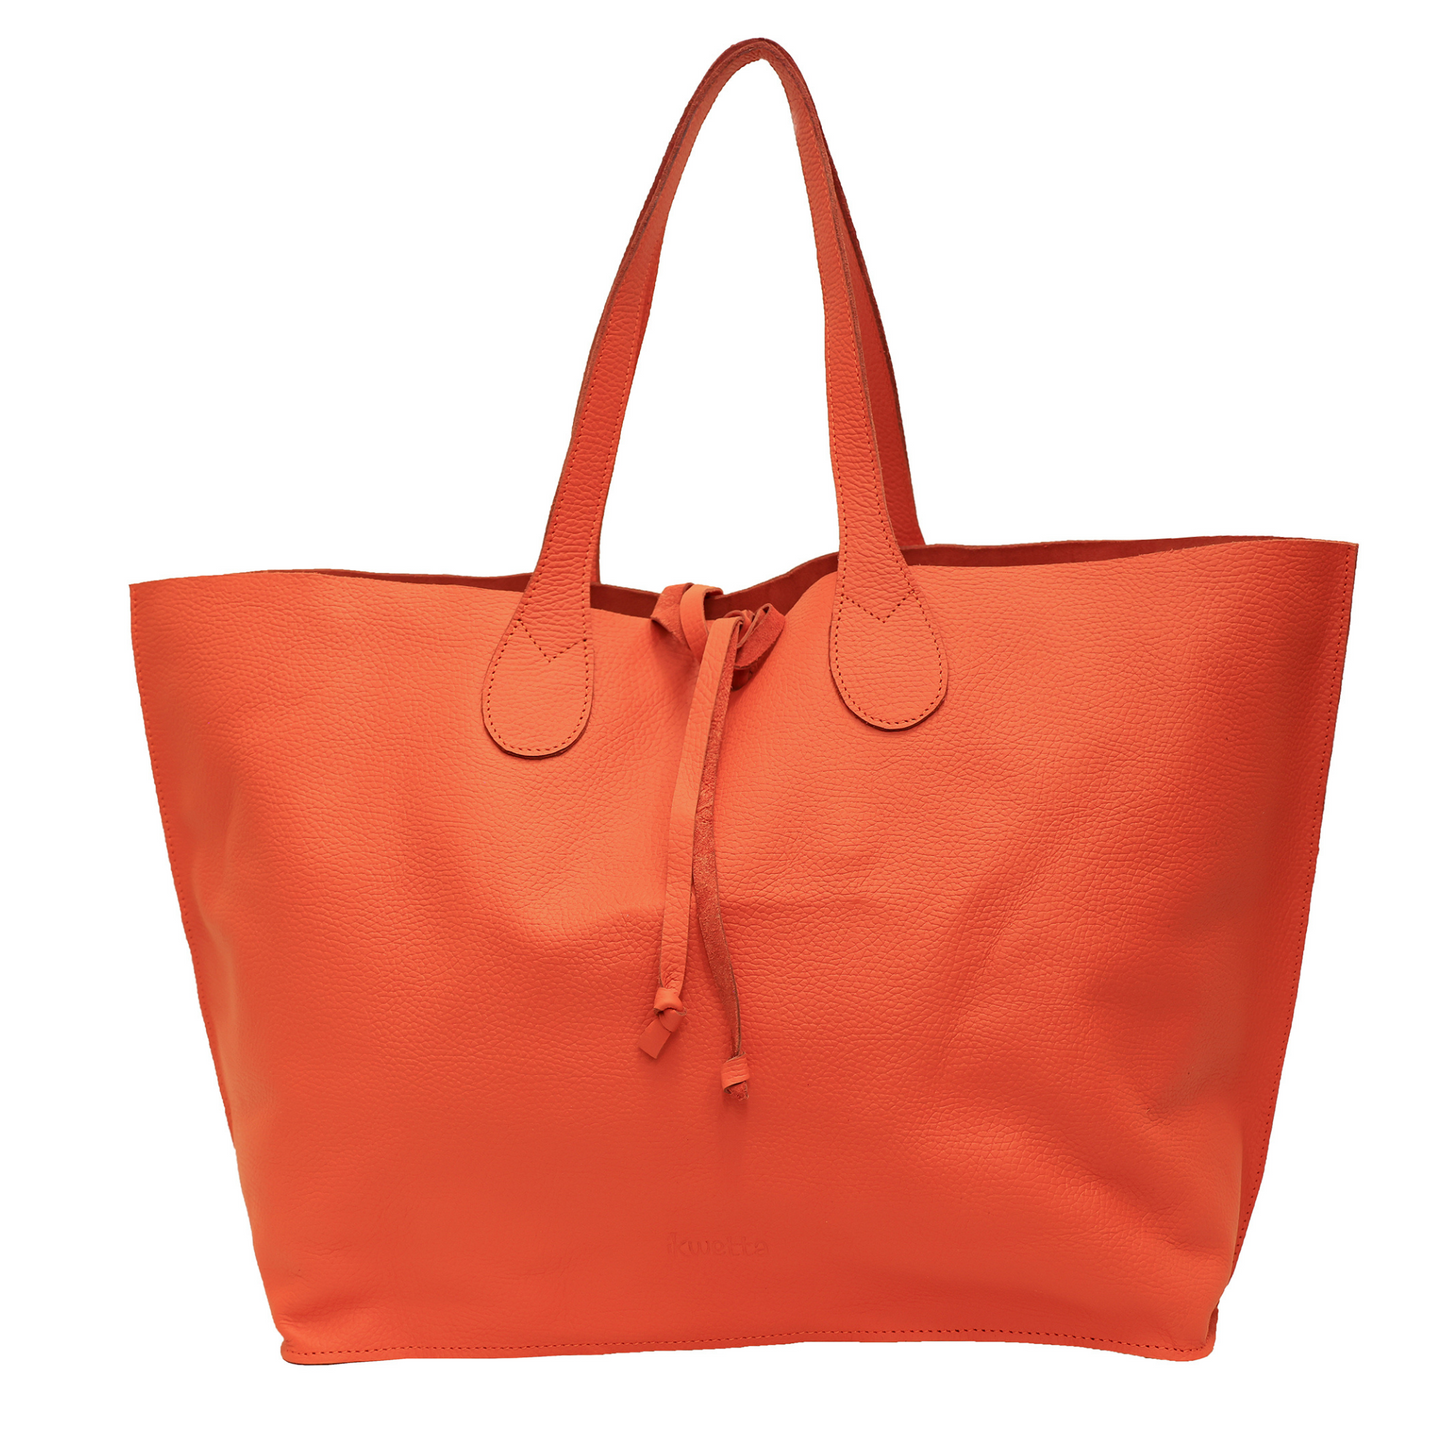 Francesca tote in Burnt Ciena milled leather